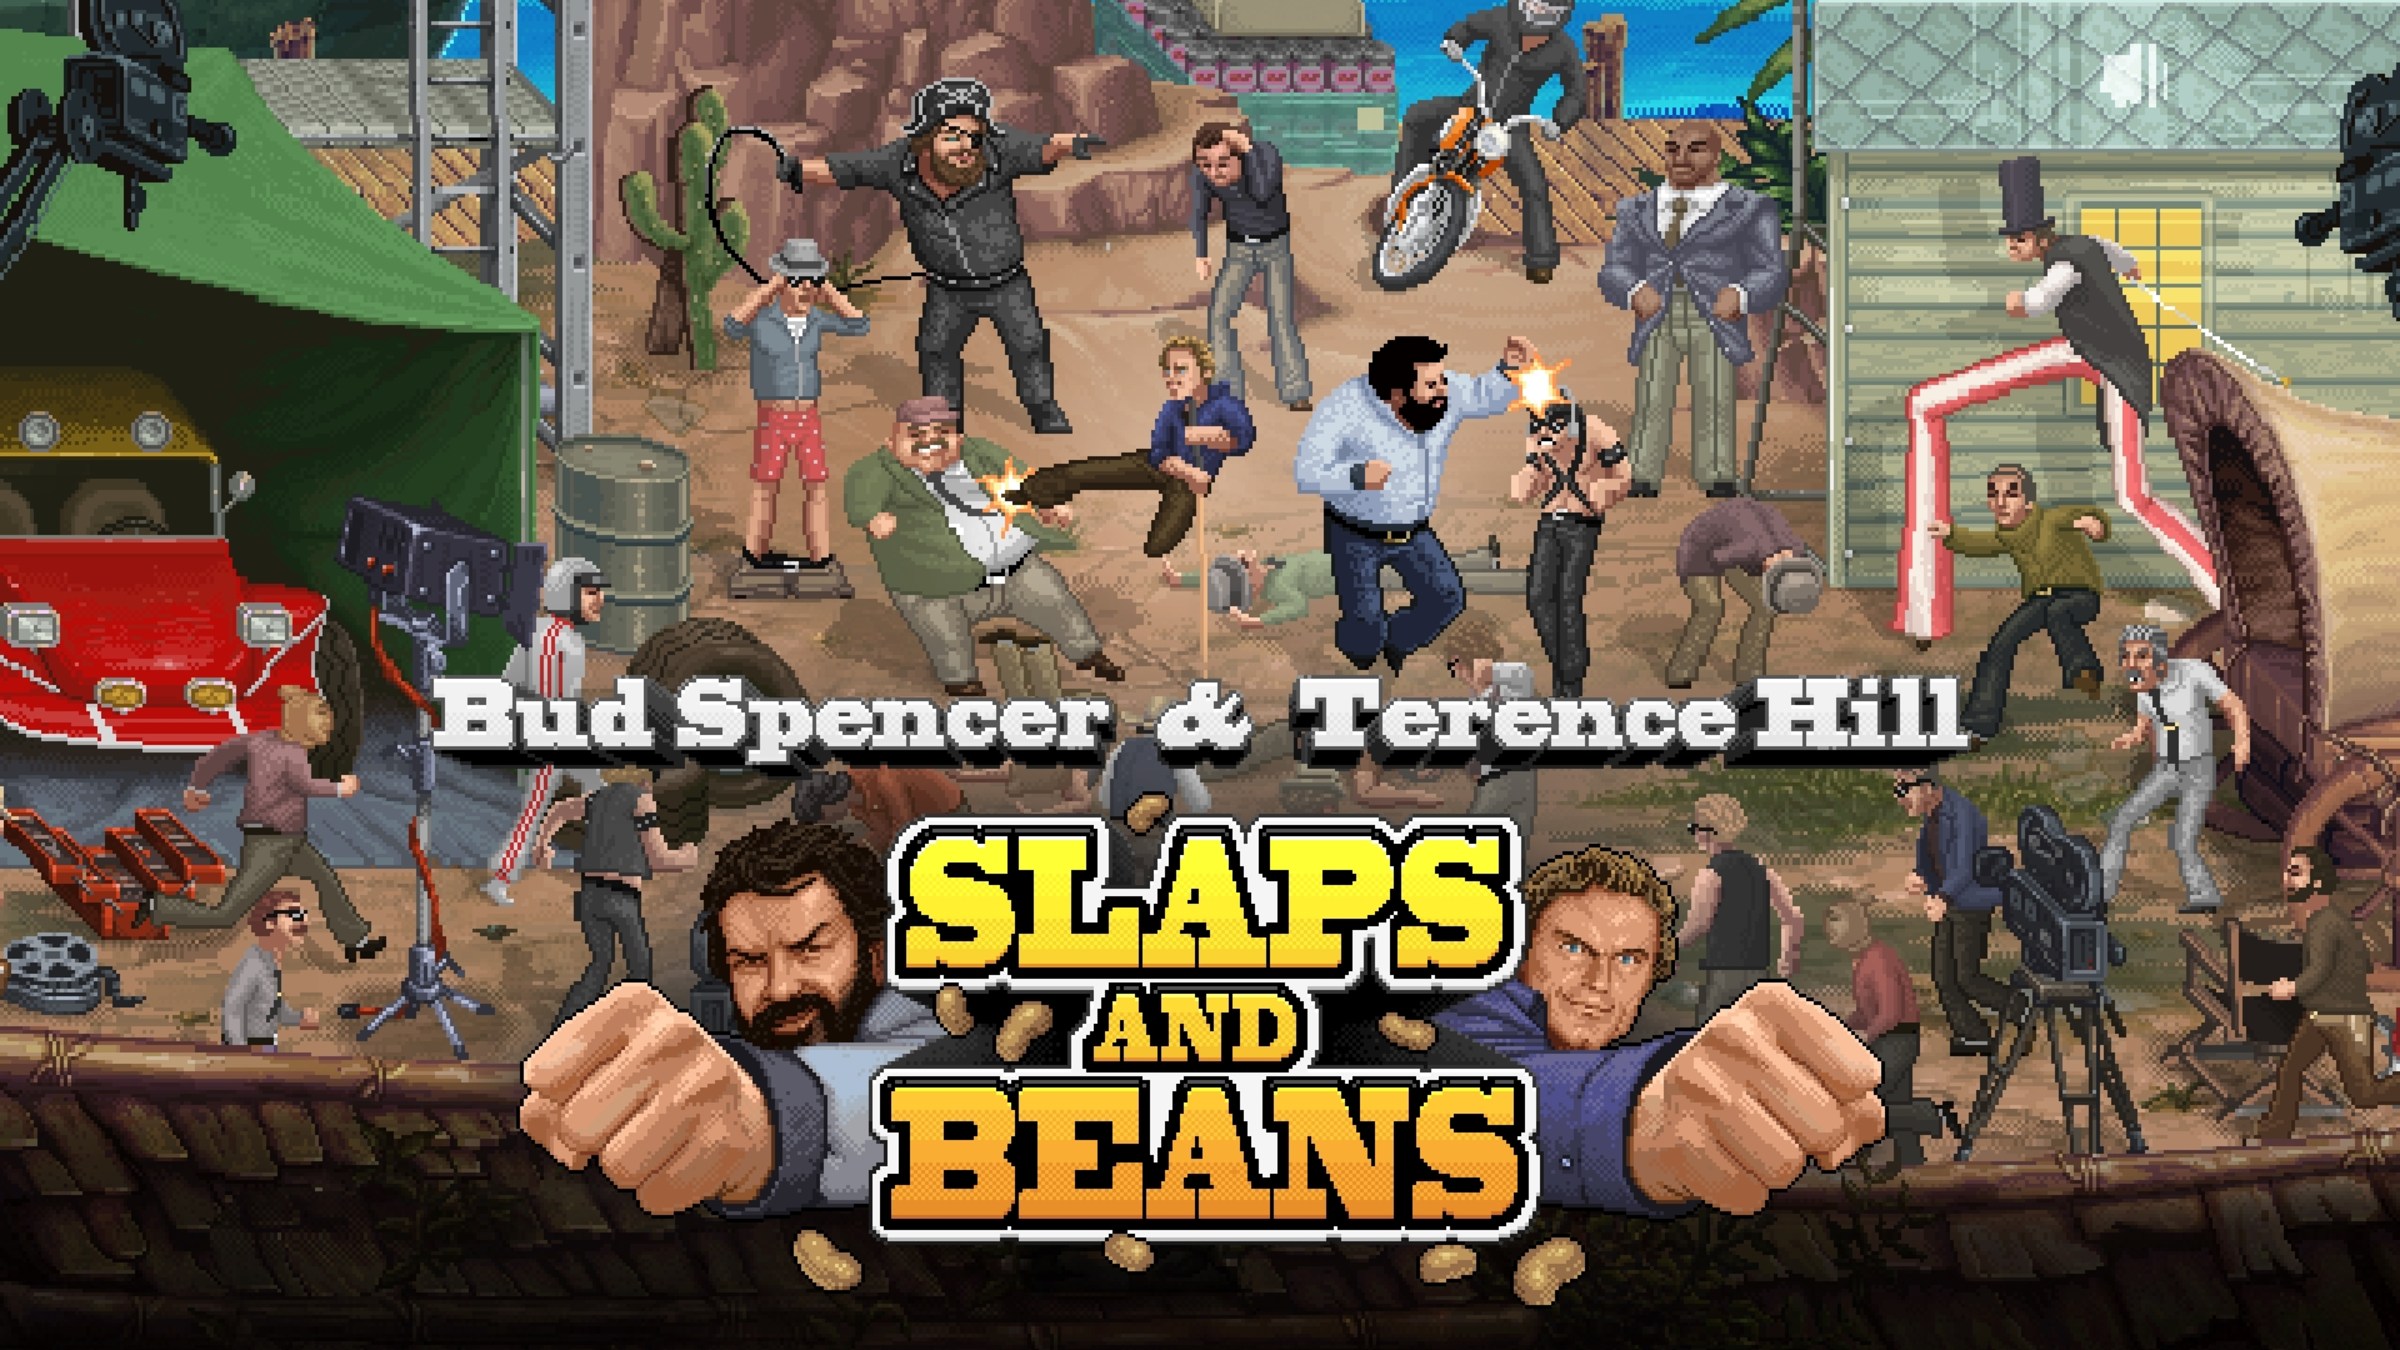 https://assets.nintendo.com/image/upload/c_fill,w_1200/q_auto:best/f_auto/dpr_2.0/ncom/en_US/games/switch/b/bud-spencer-and-terence-hill-slaps-and-beans-switch/hero